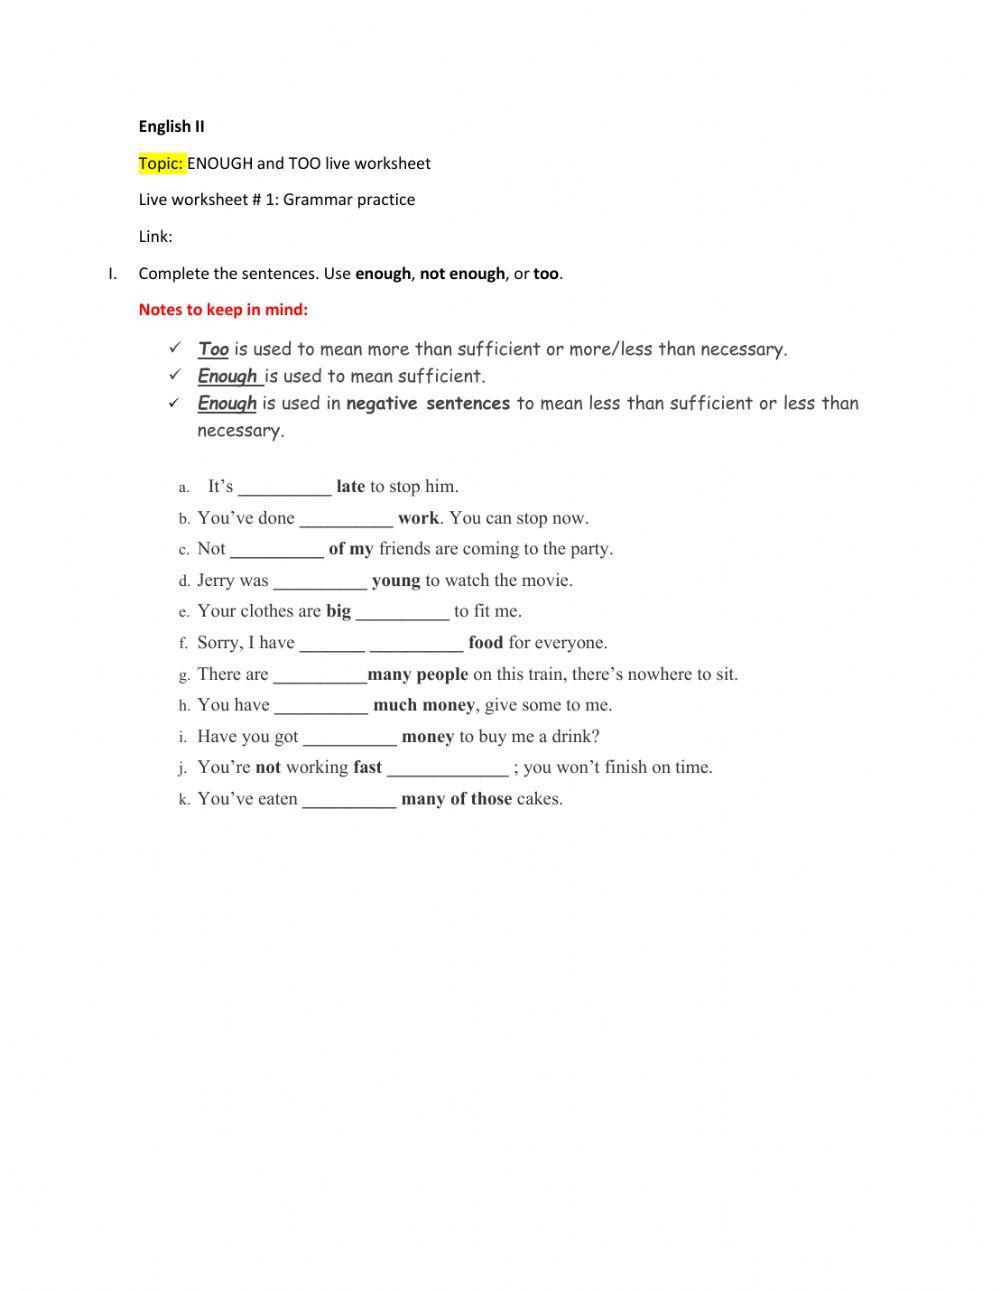 ENOUGH and TOO live worksheet